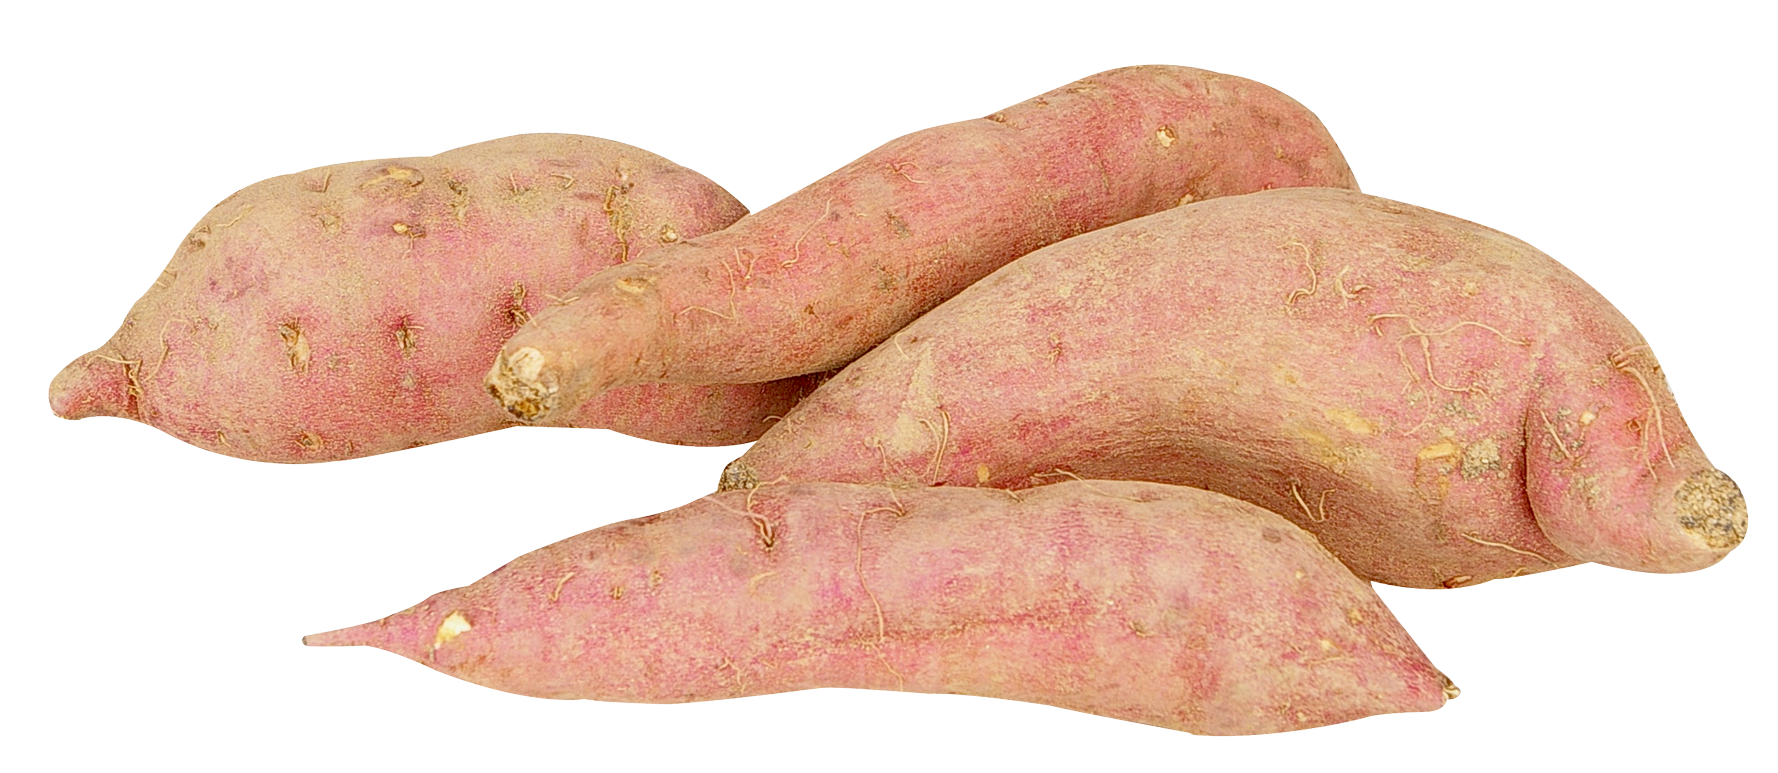 A Group Of Sweet Potatoes